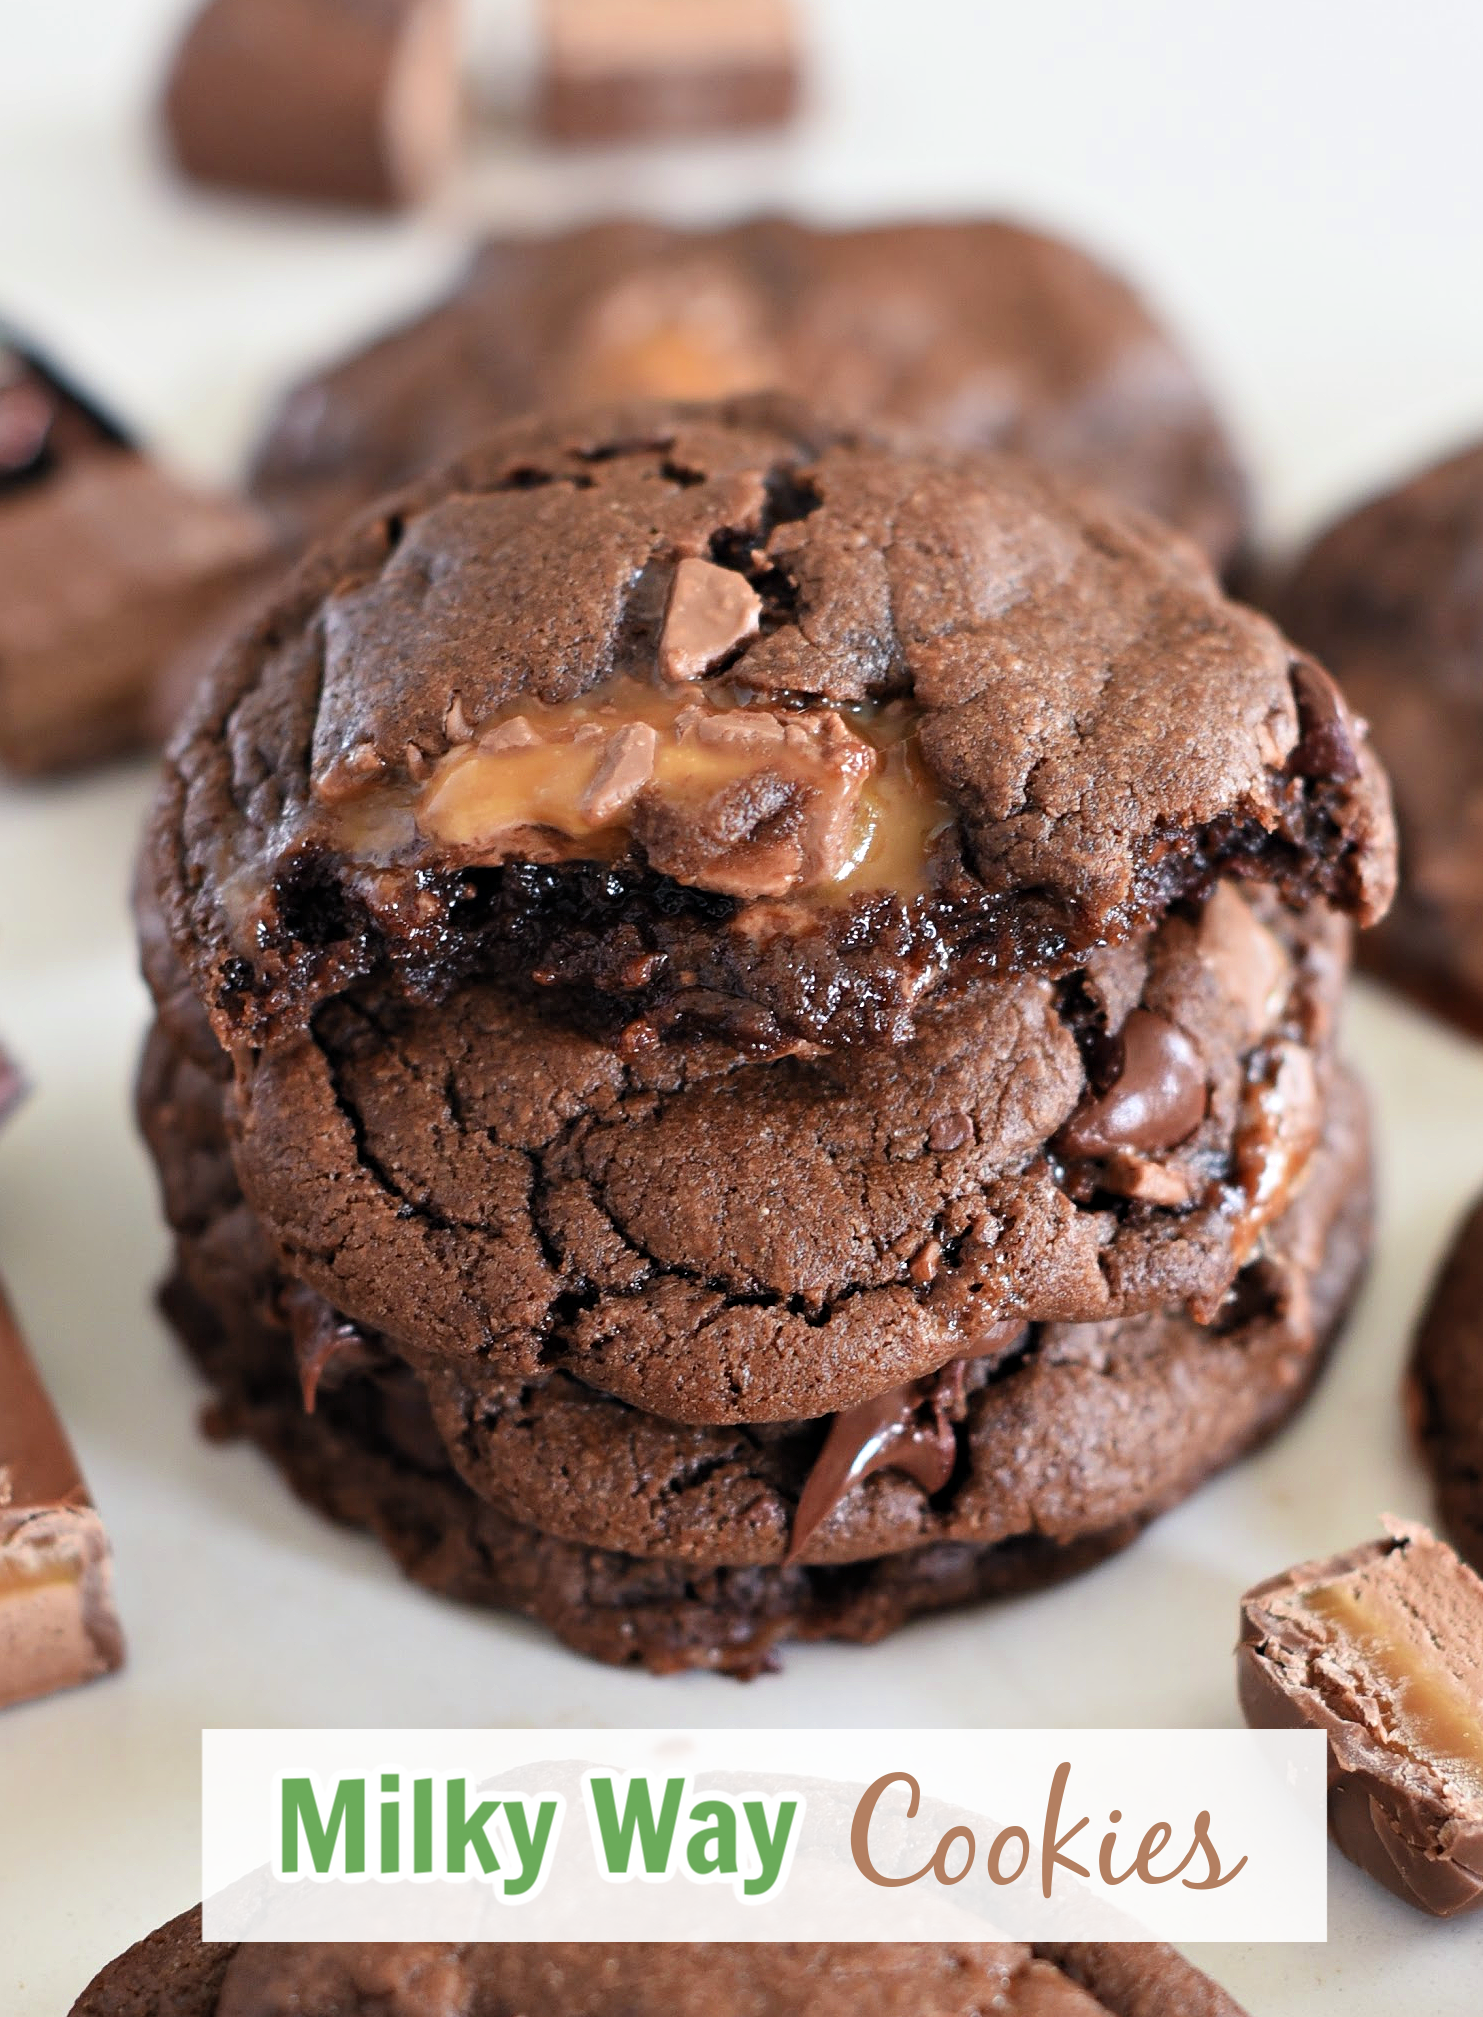 Milky Way Cookies: Soft and chewy chocolate cookies filled with bits of caramely Milky Ways.